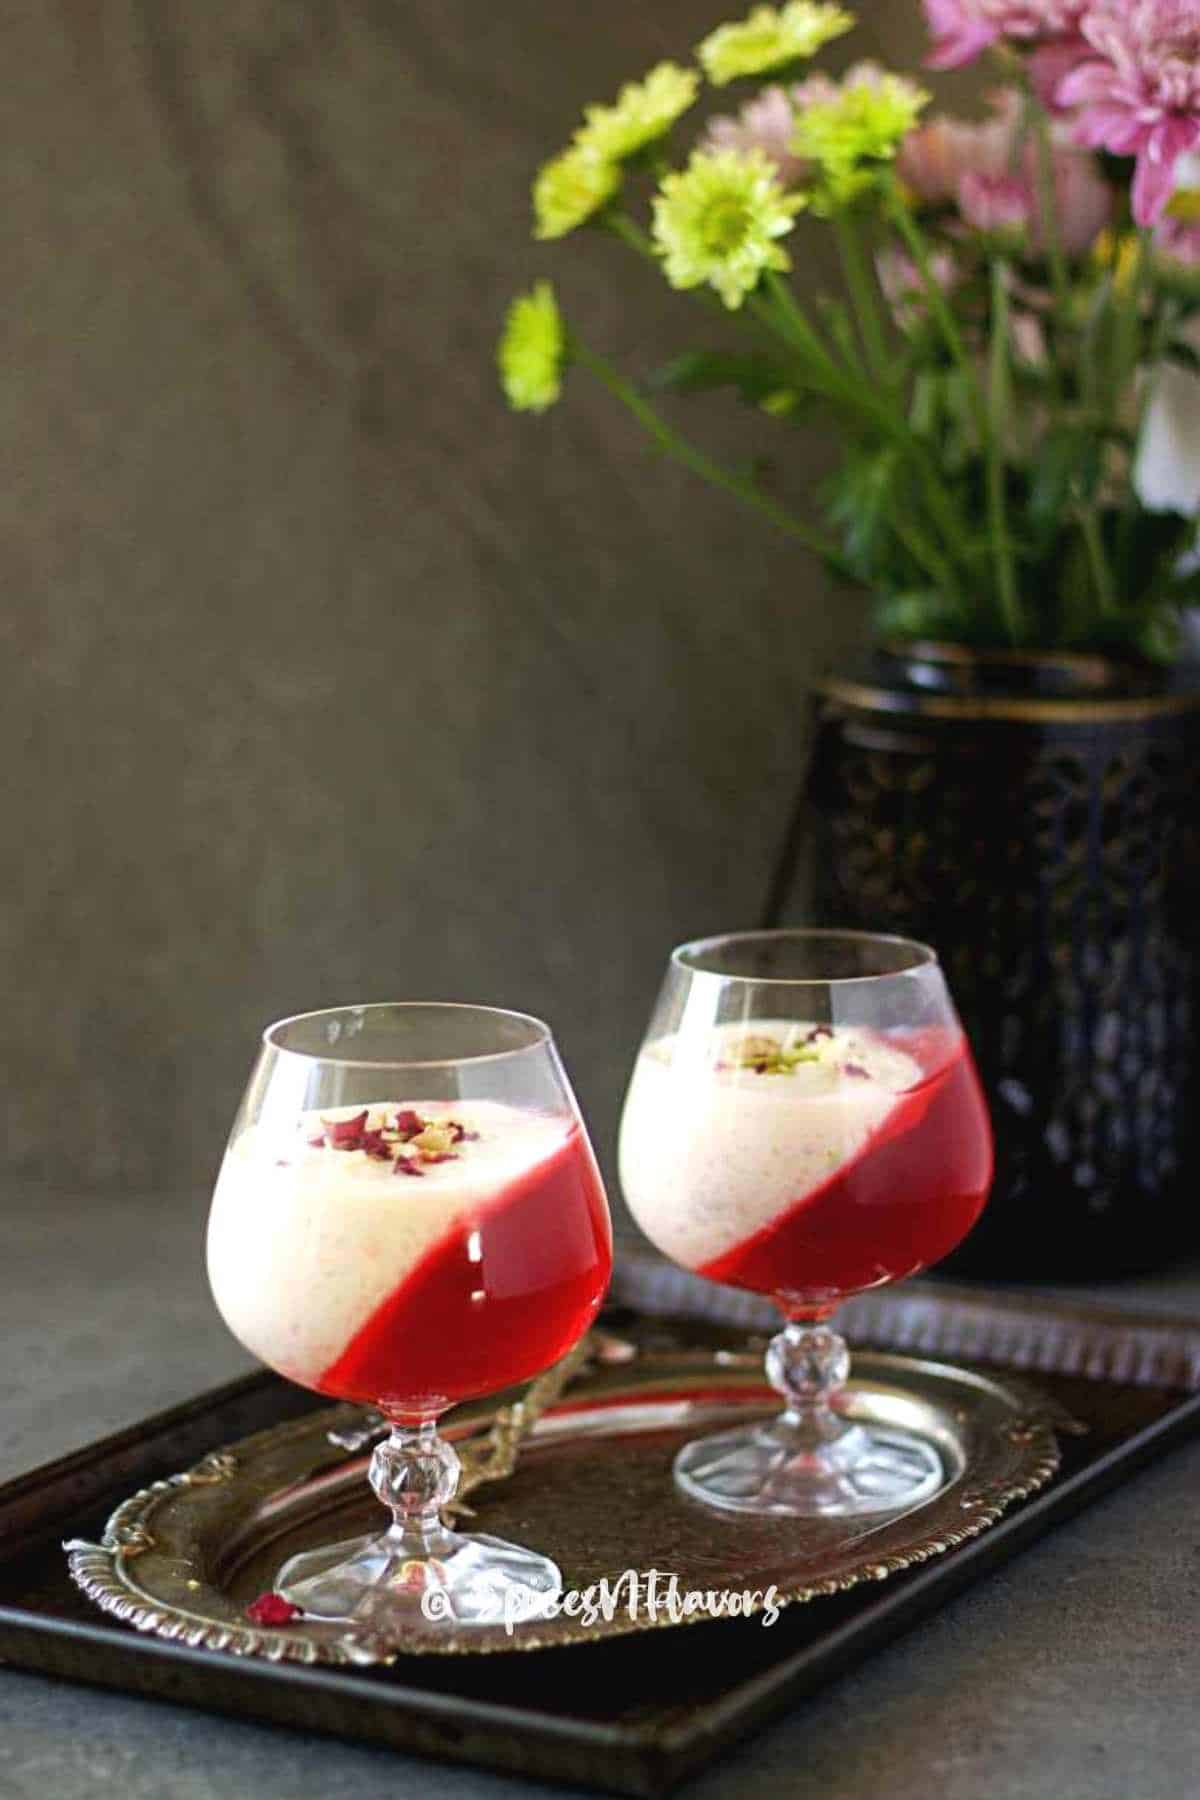 rice kheer served with jelly in wine glasses